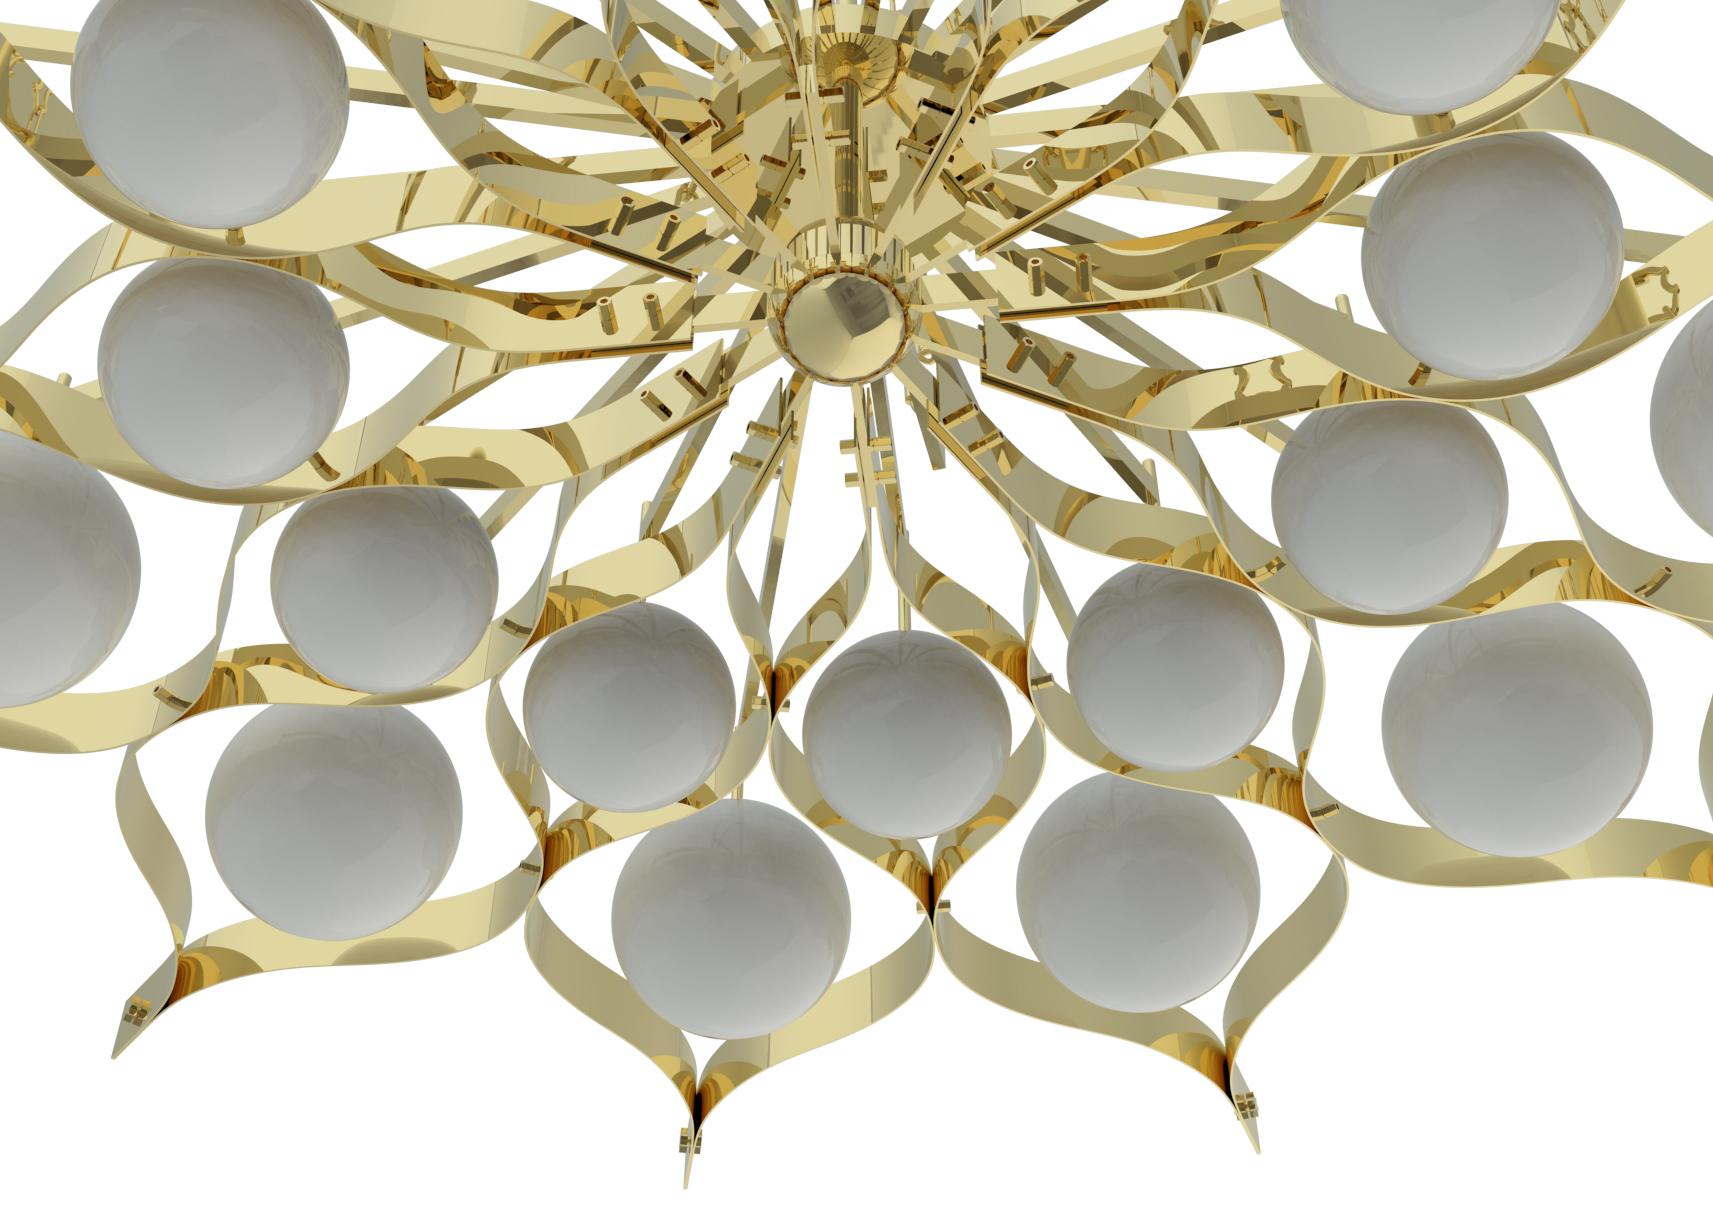 Italian 21st Century Pavone Large Pendant Lamp with chains, DALI, Gio Ponti 2019 Italy For Sale